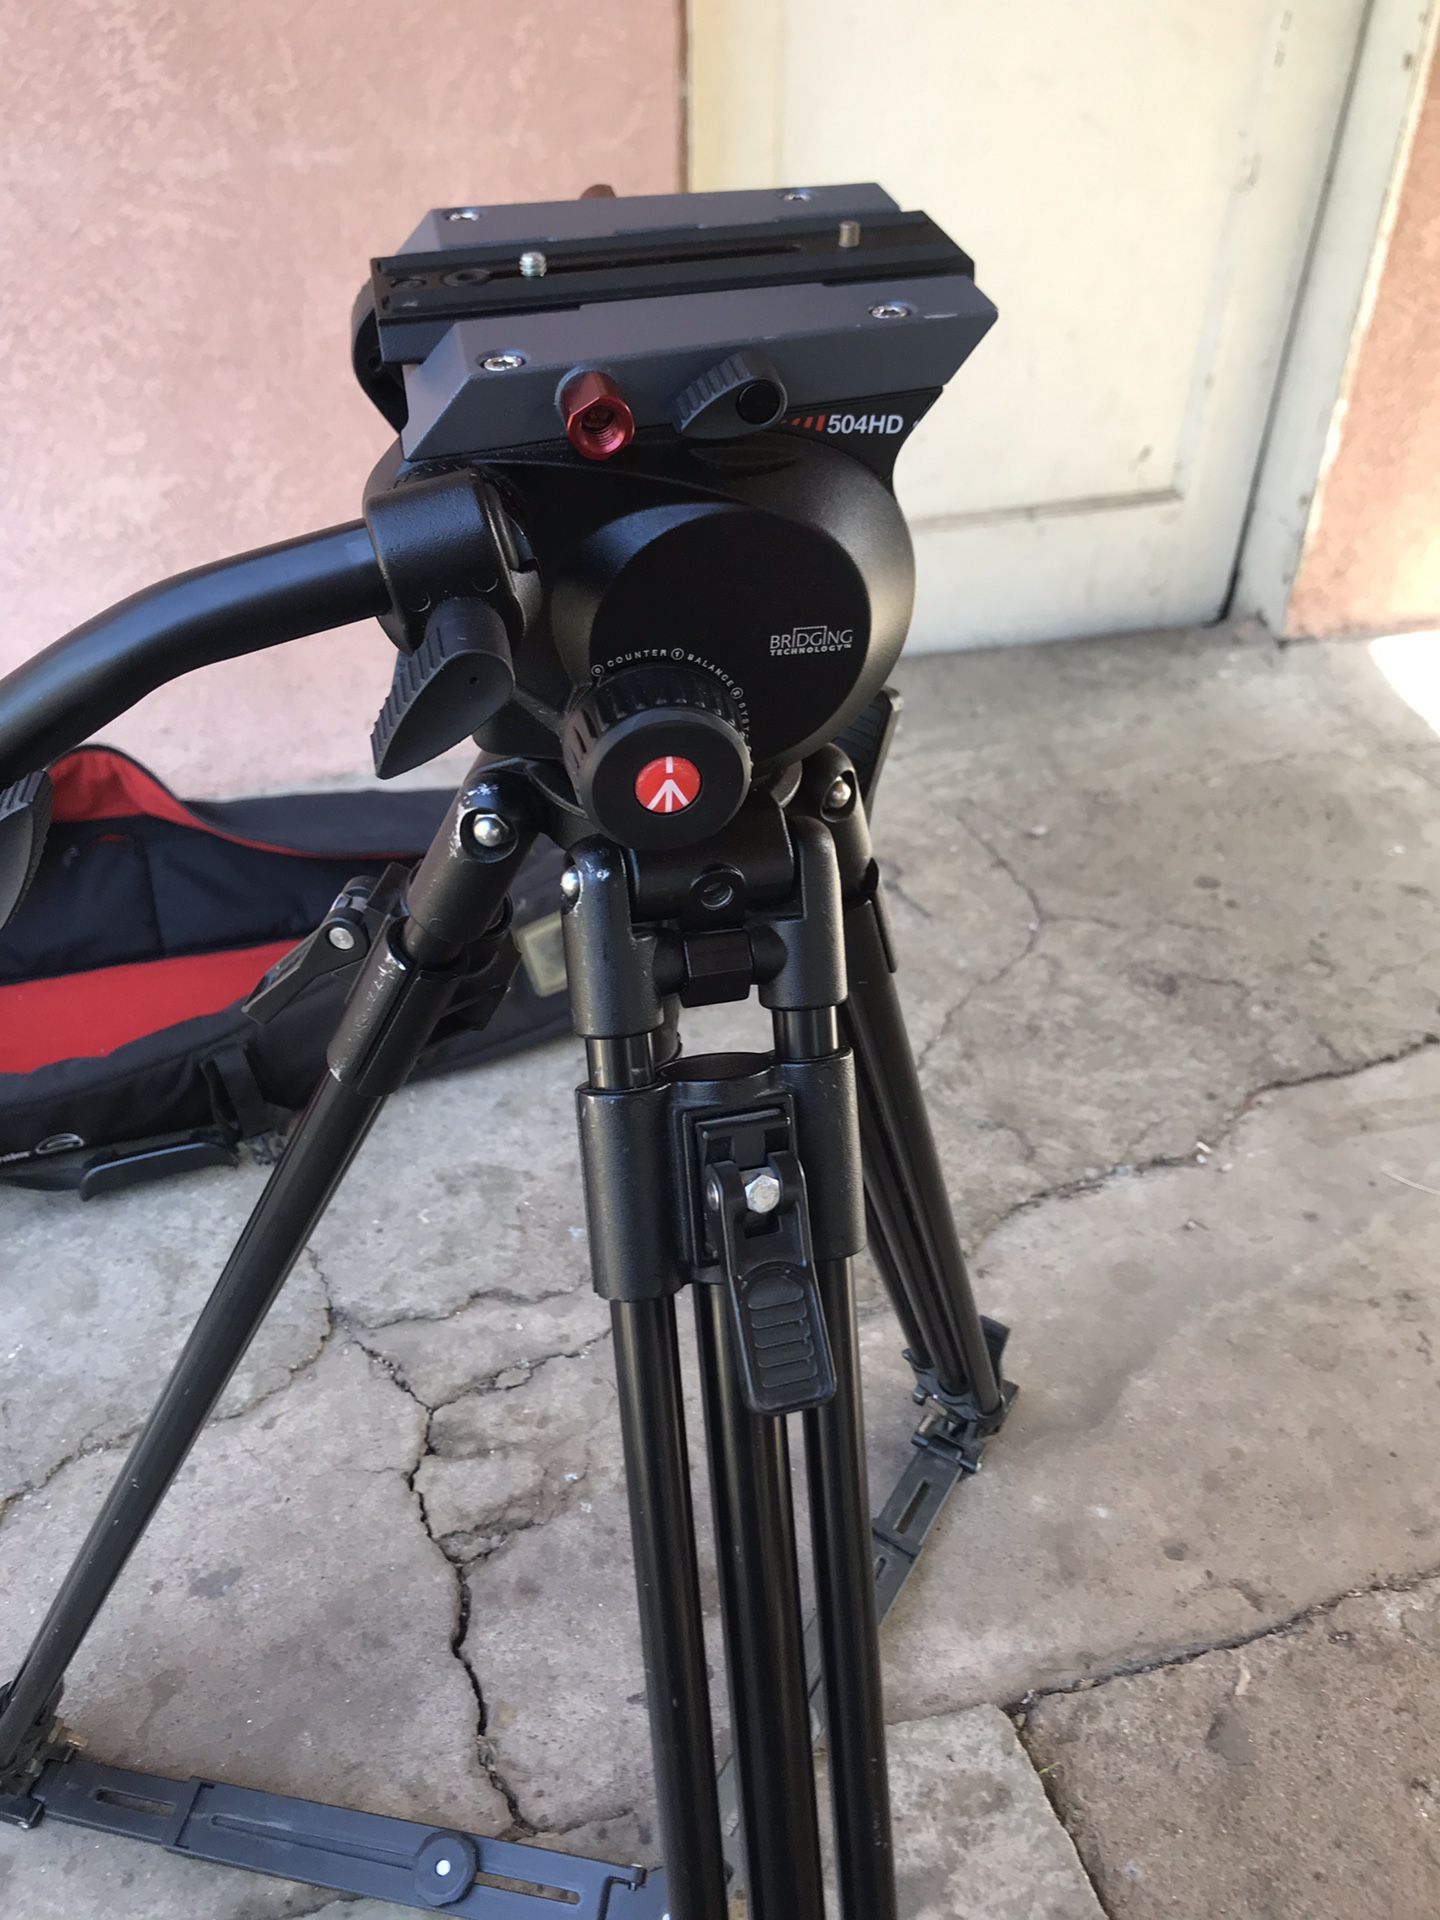 manfrotto 504hd tripod like new , quick release plate and carrying bag